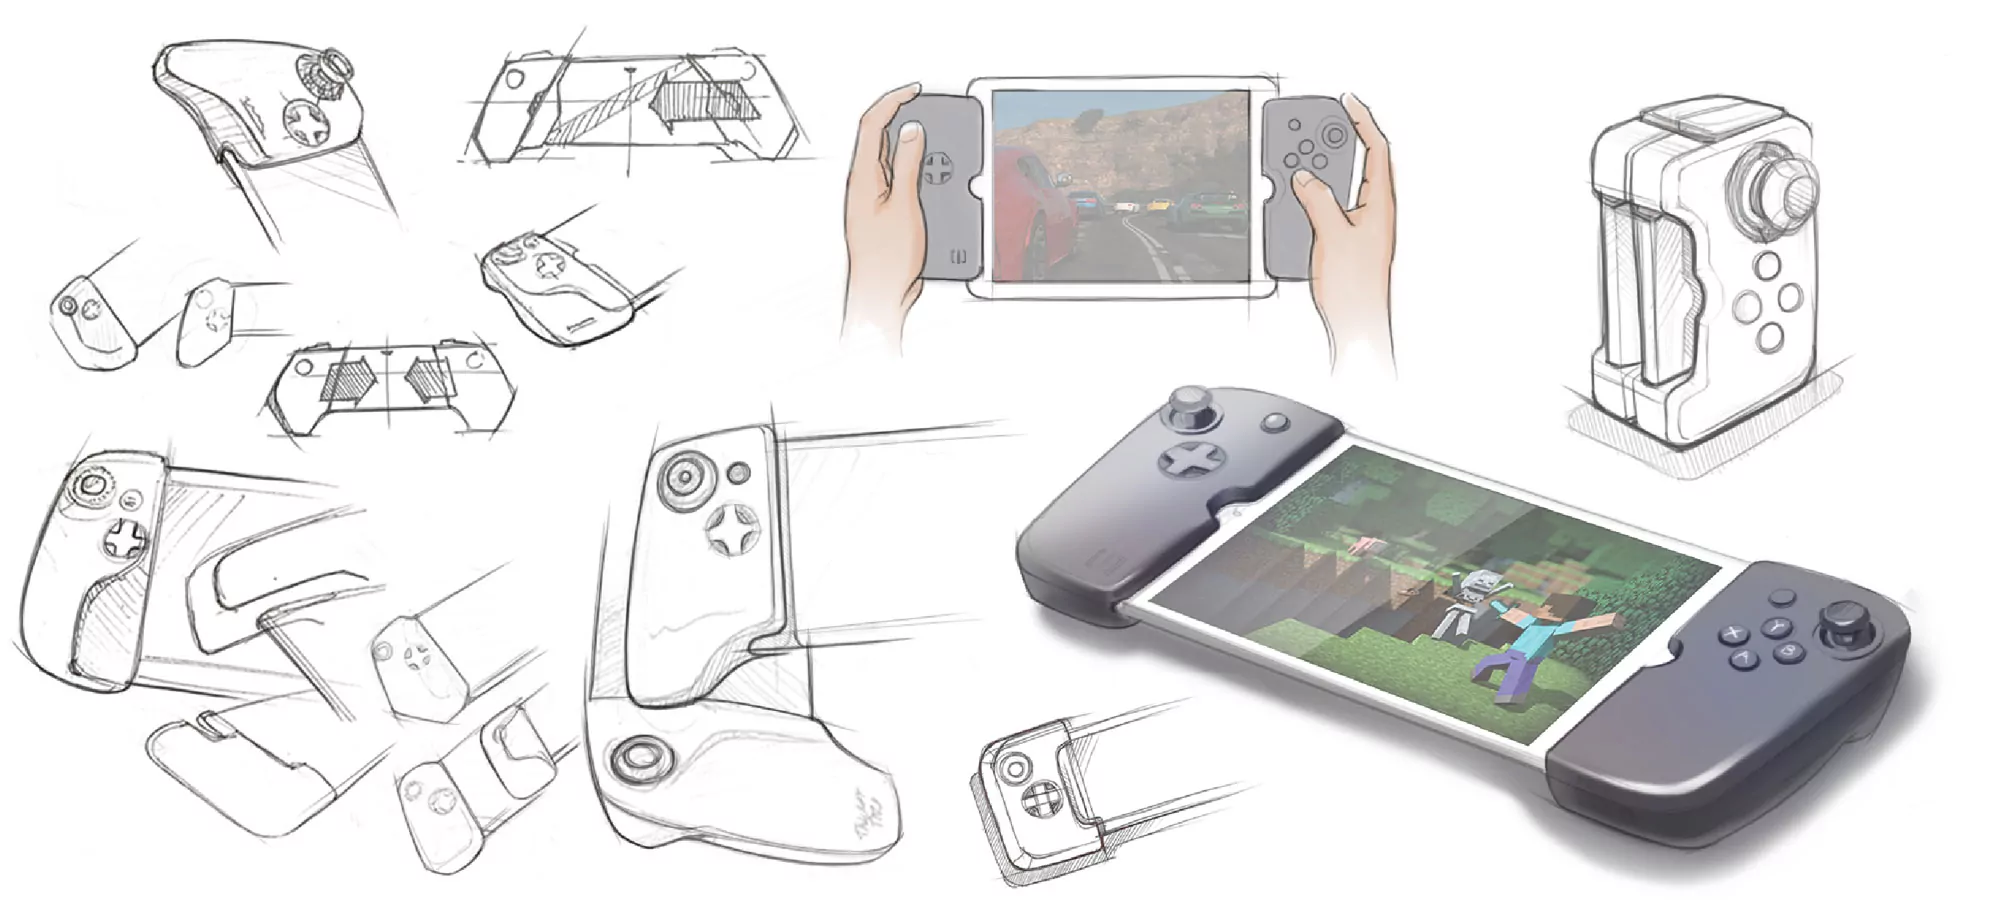 Initial designs of Gamevice console